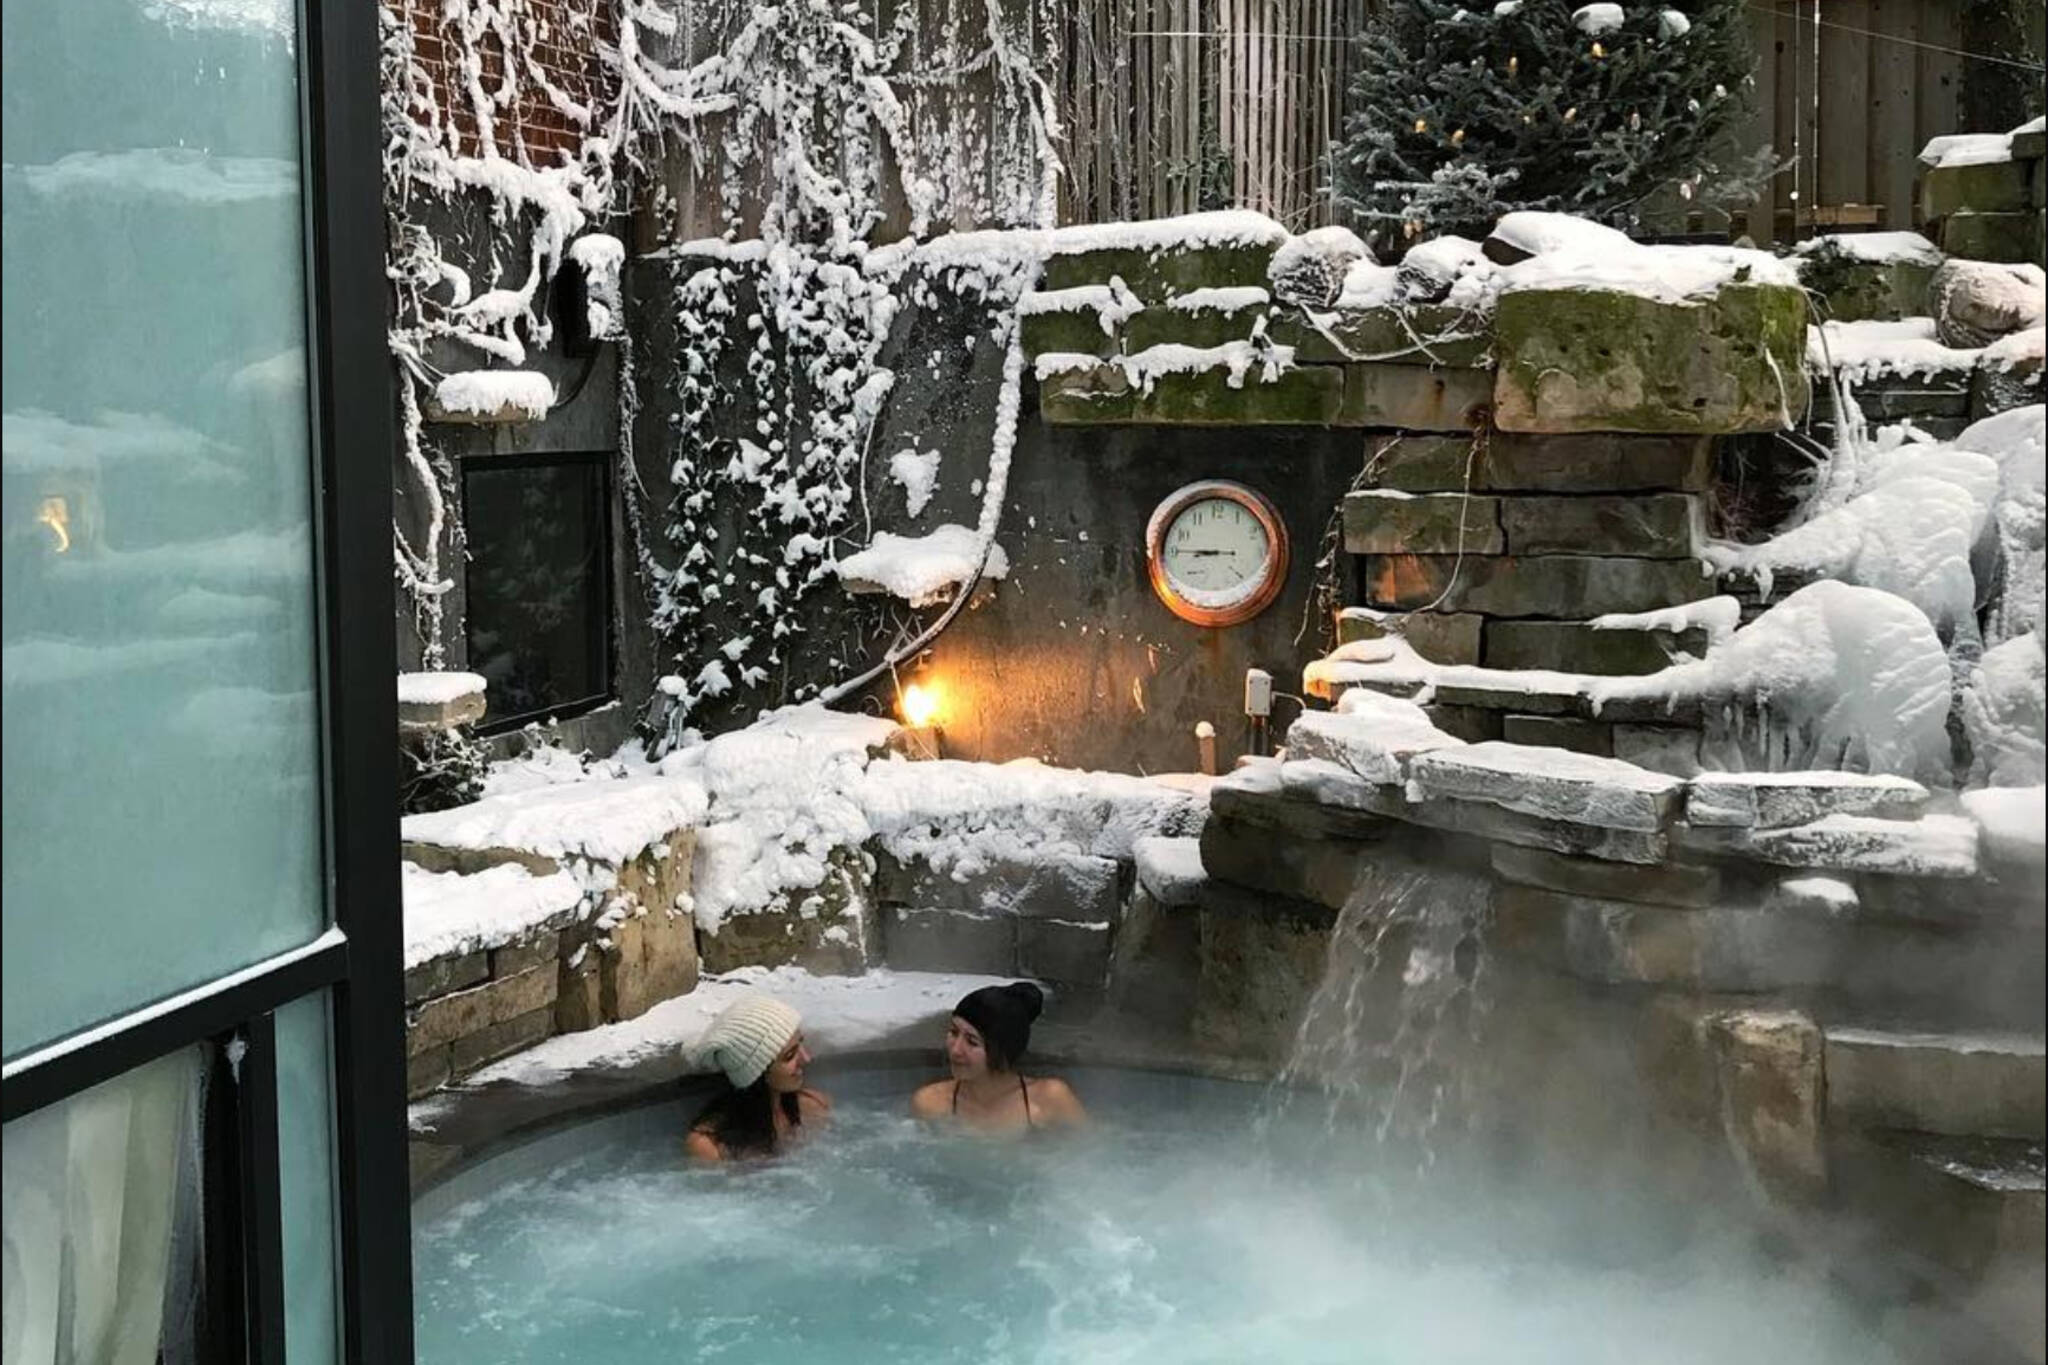 This spa and outdoor hot spring is a winter oasis near Toronto